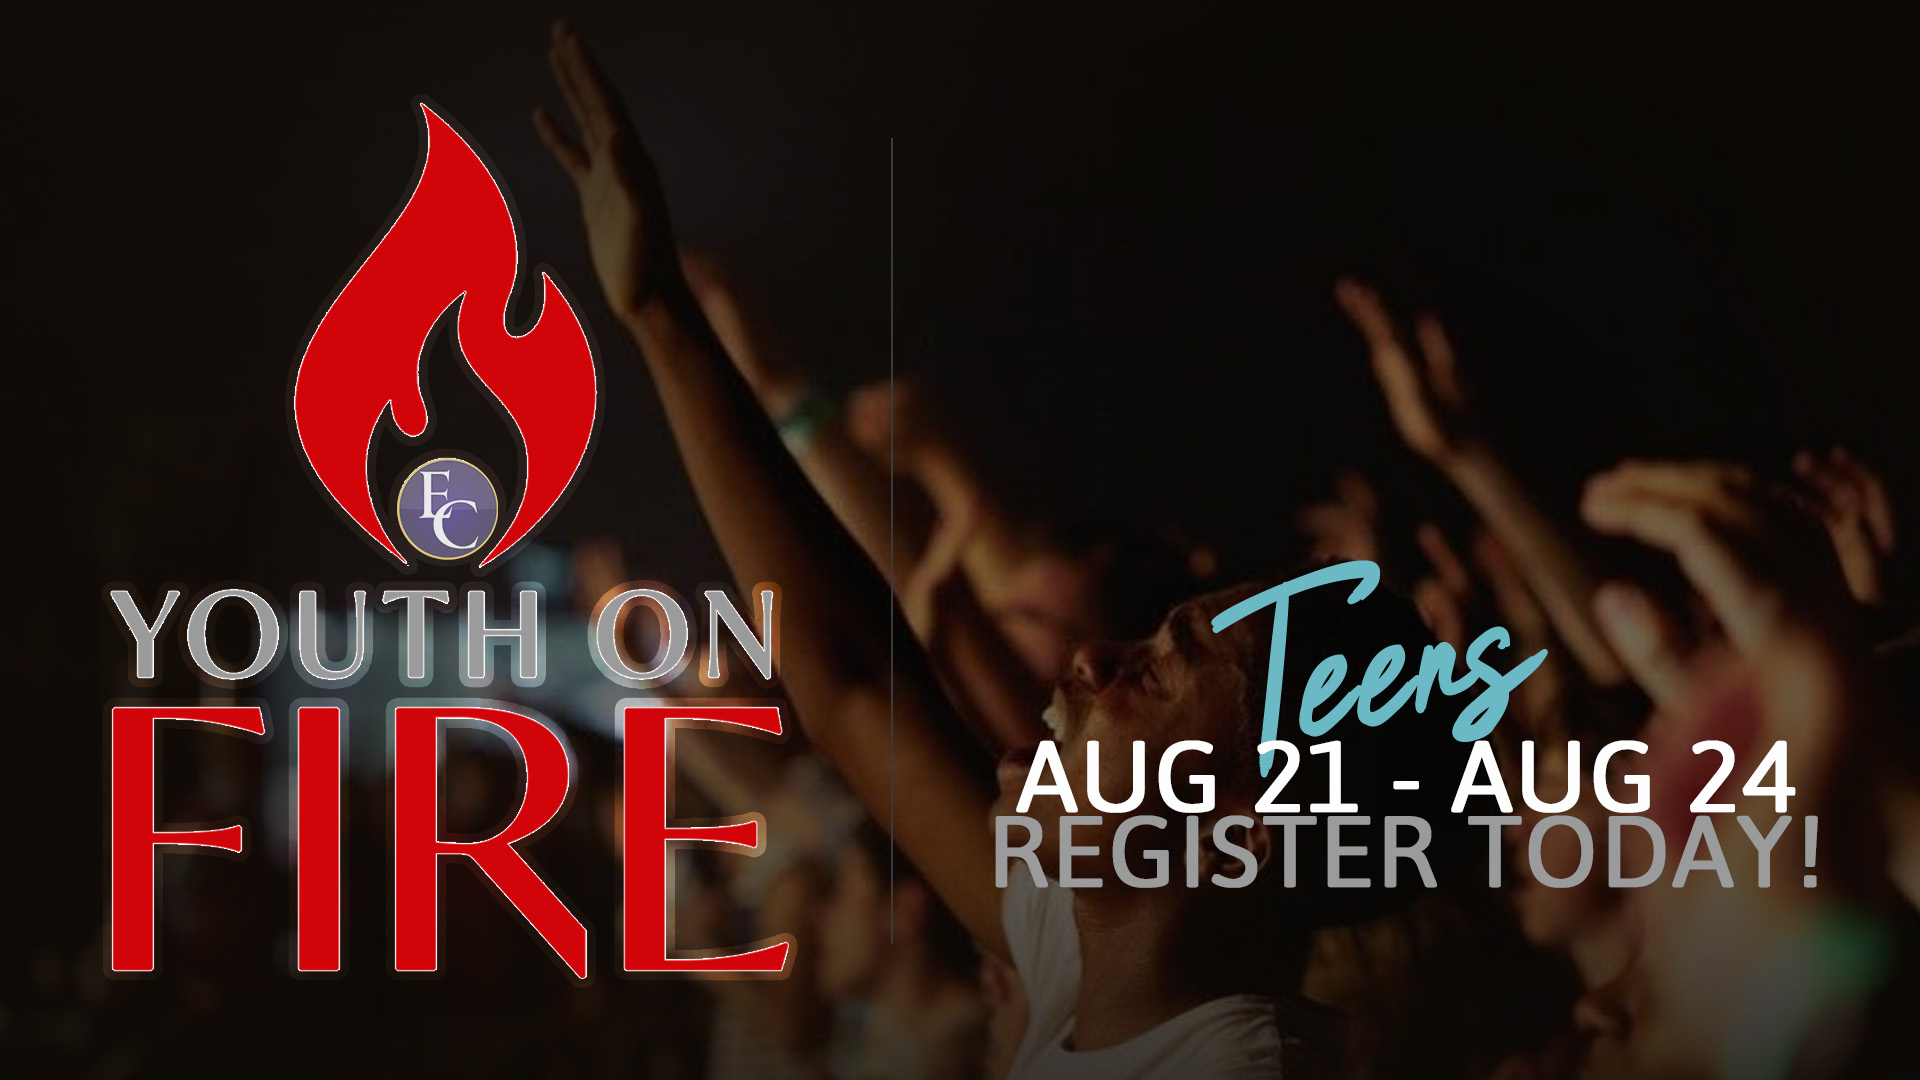 Youth on Fire: Teens on August 21 - 24. Register Today!